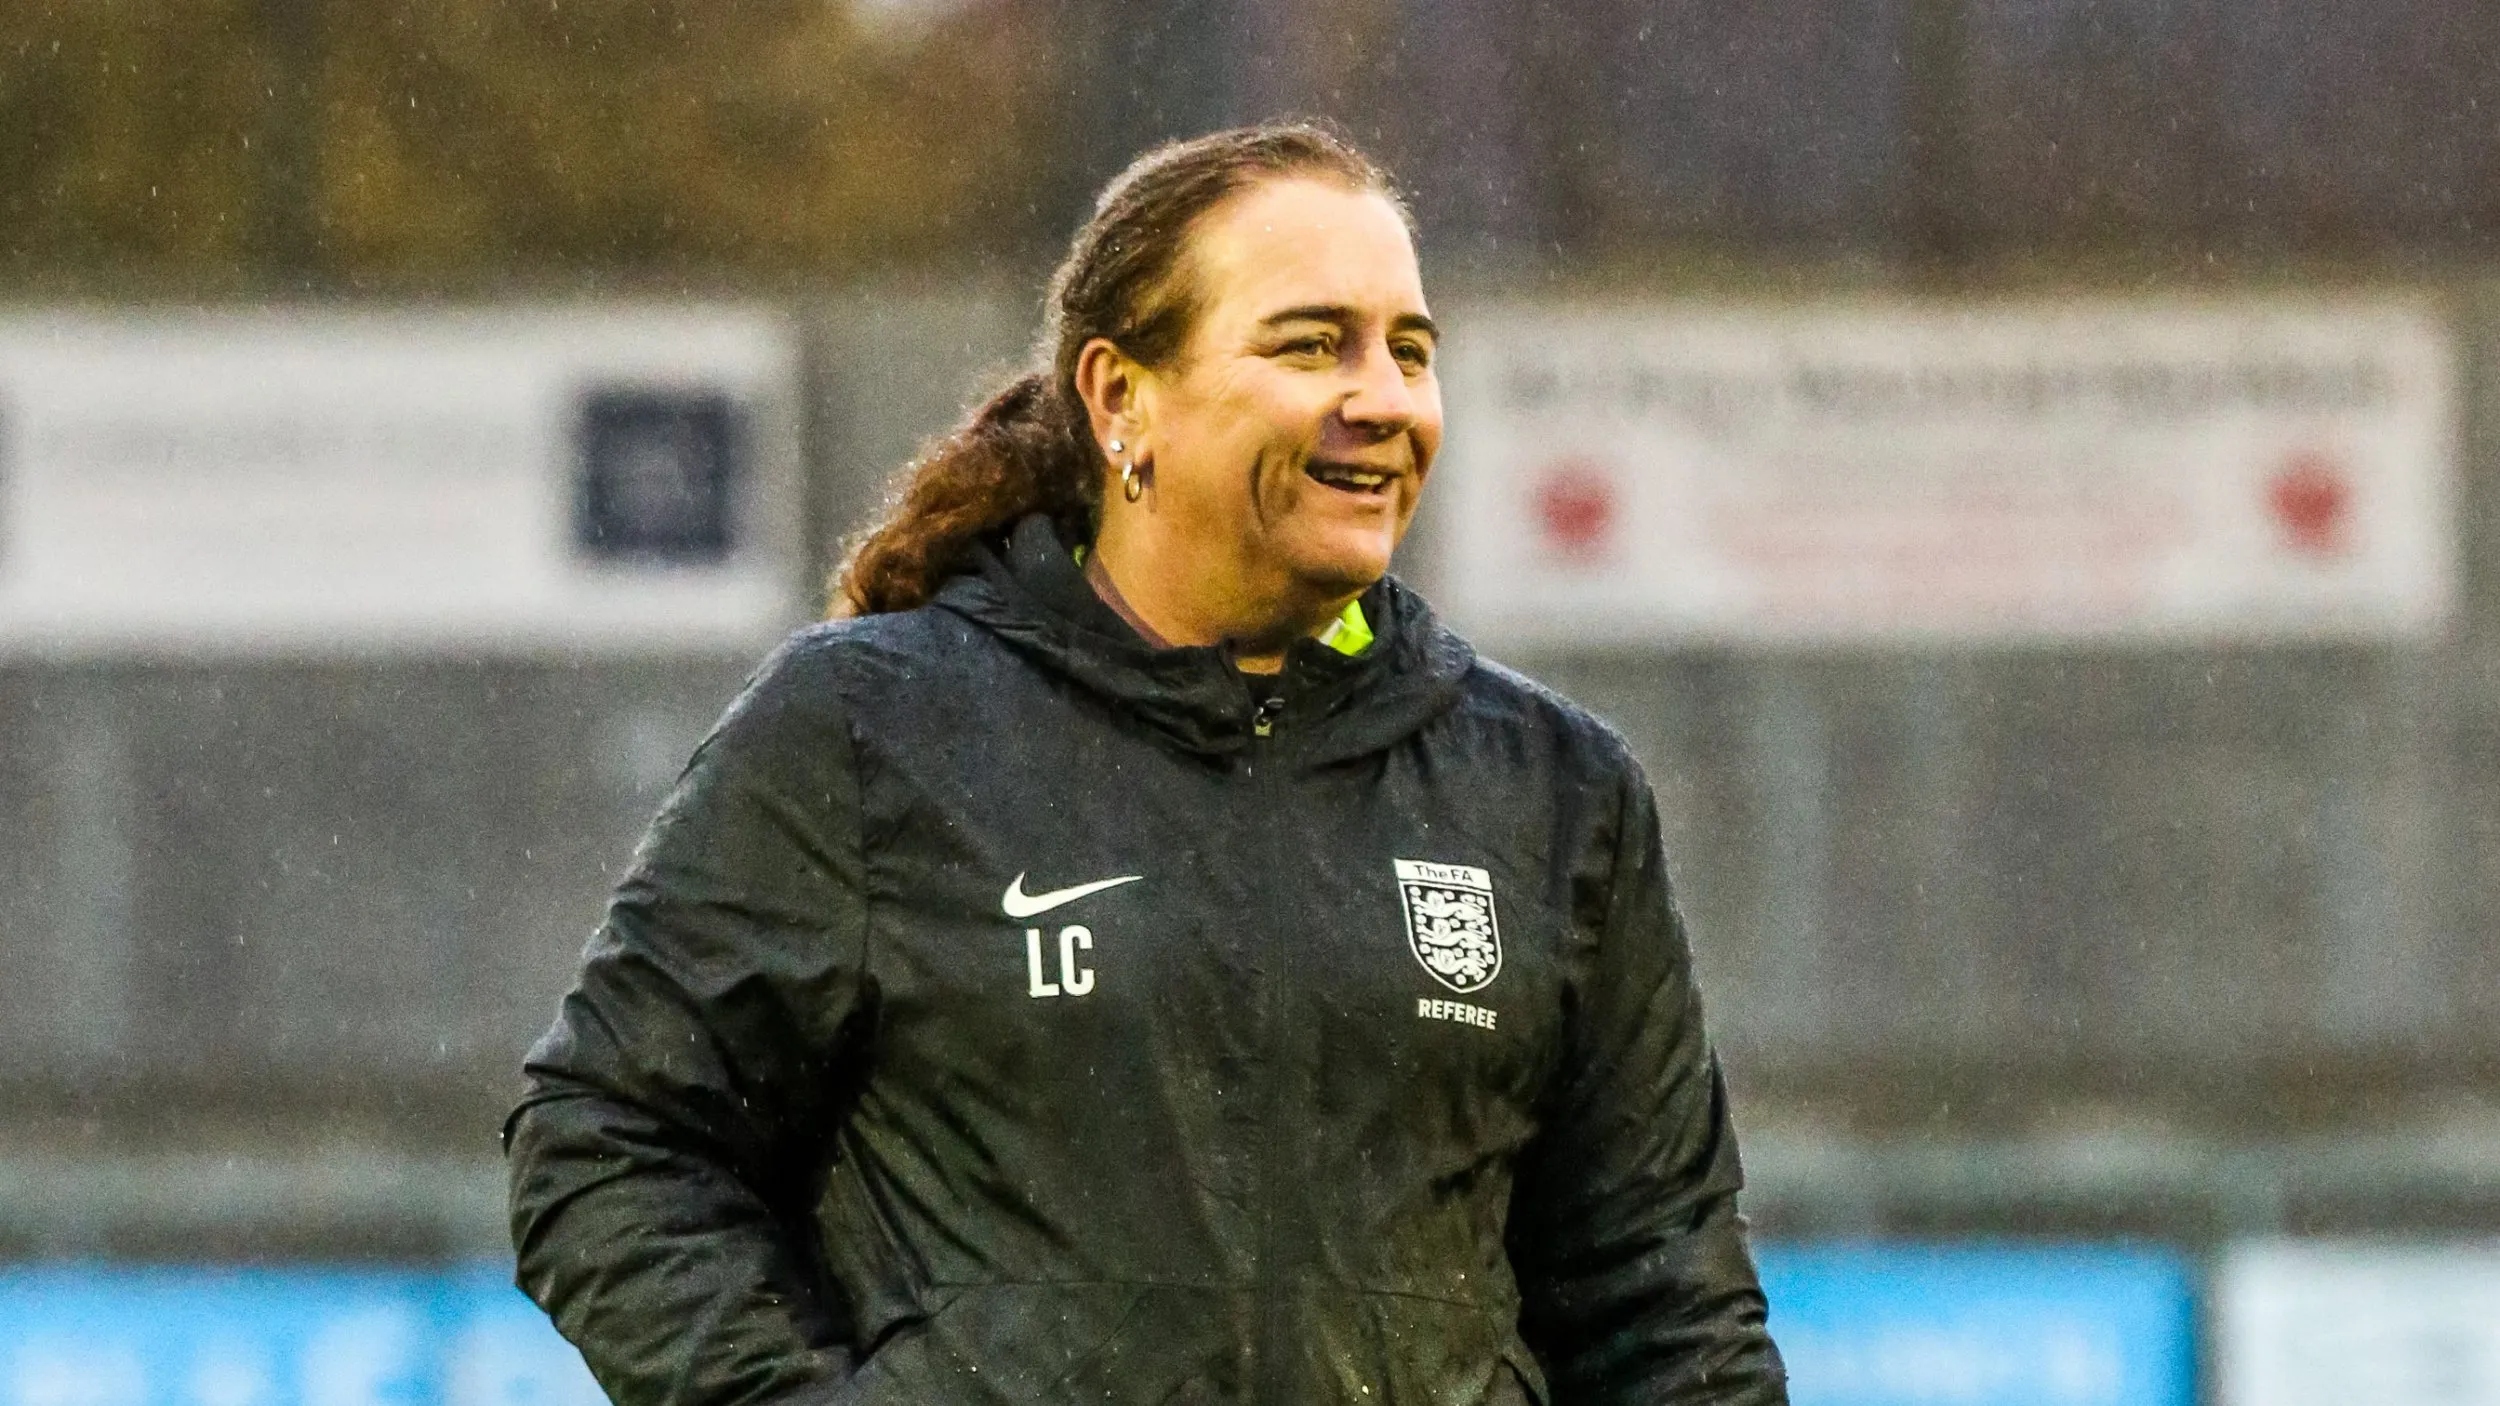 Sports Lucy Clark football referee the world's openly transgender referee